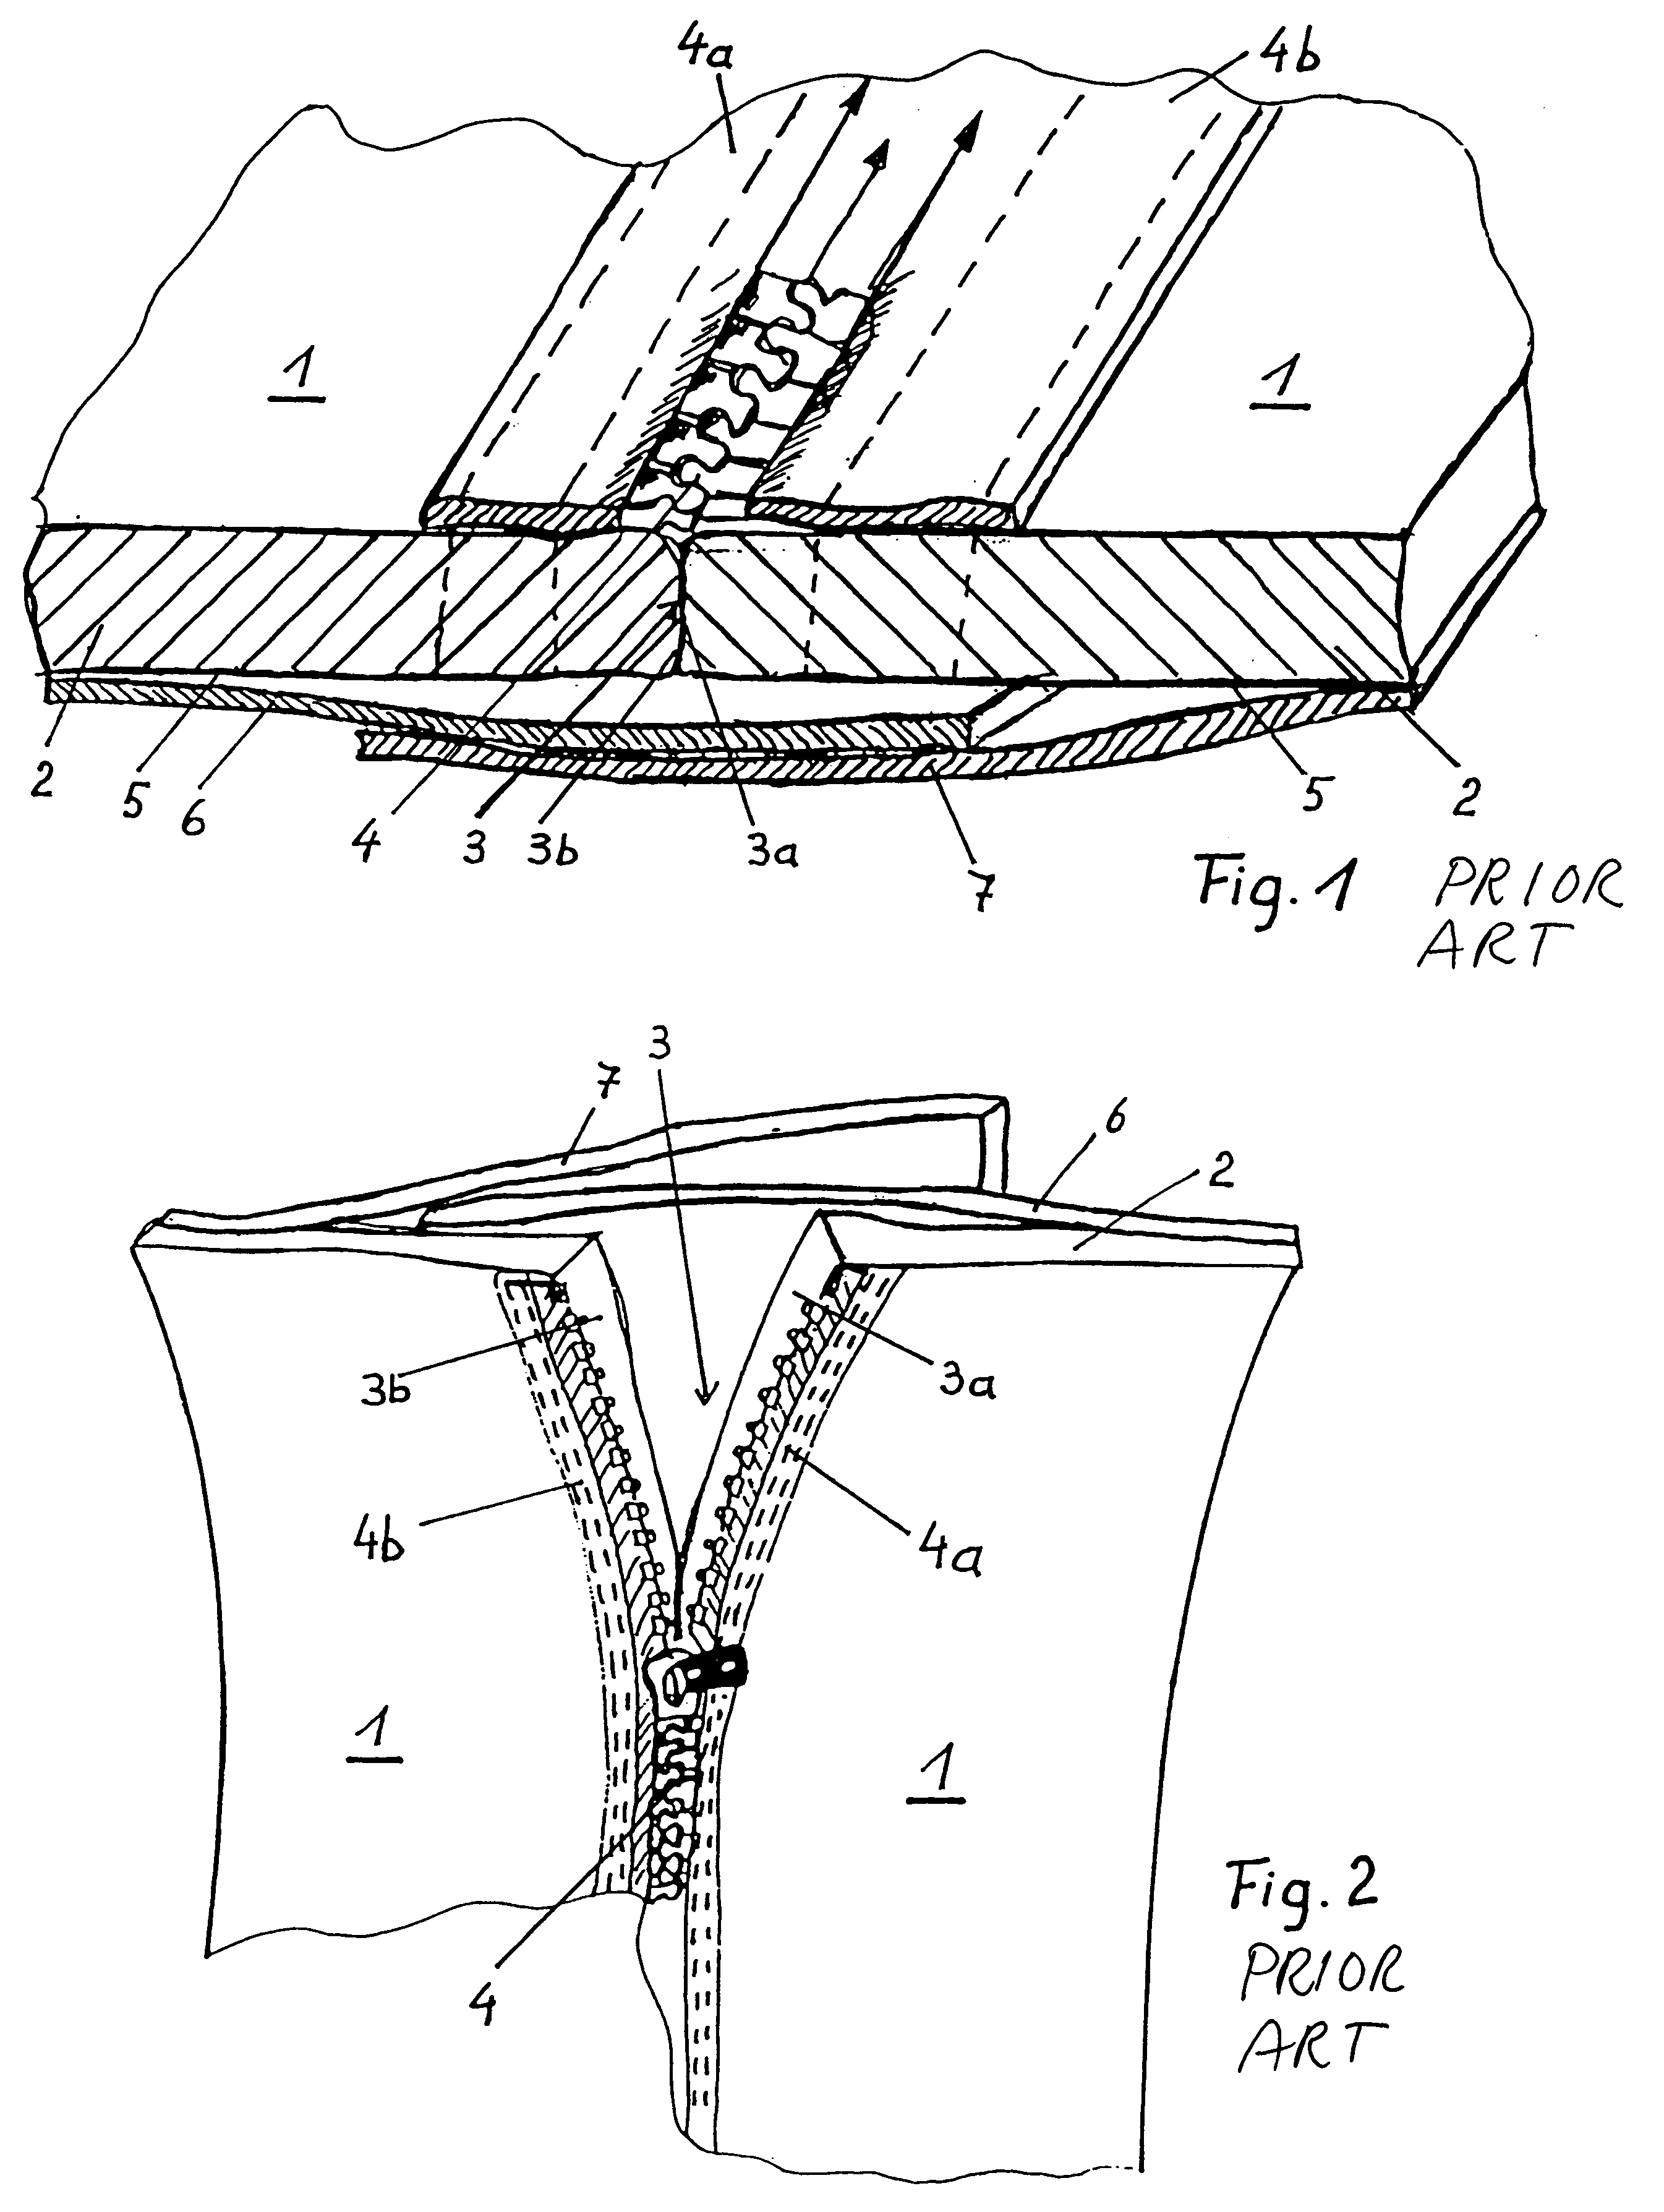 Closure device for slit opening of aquatic sport suit